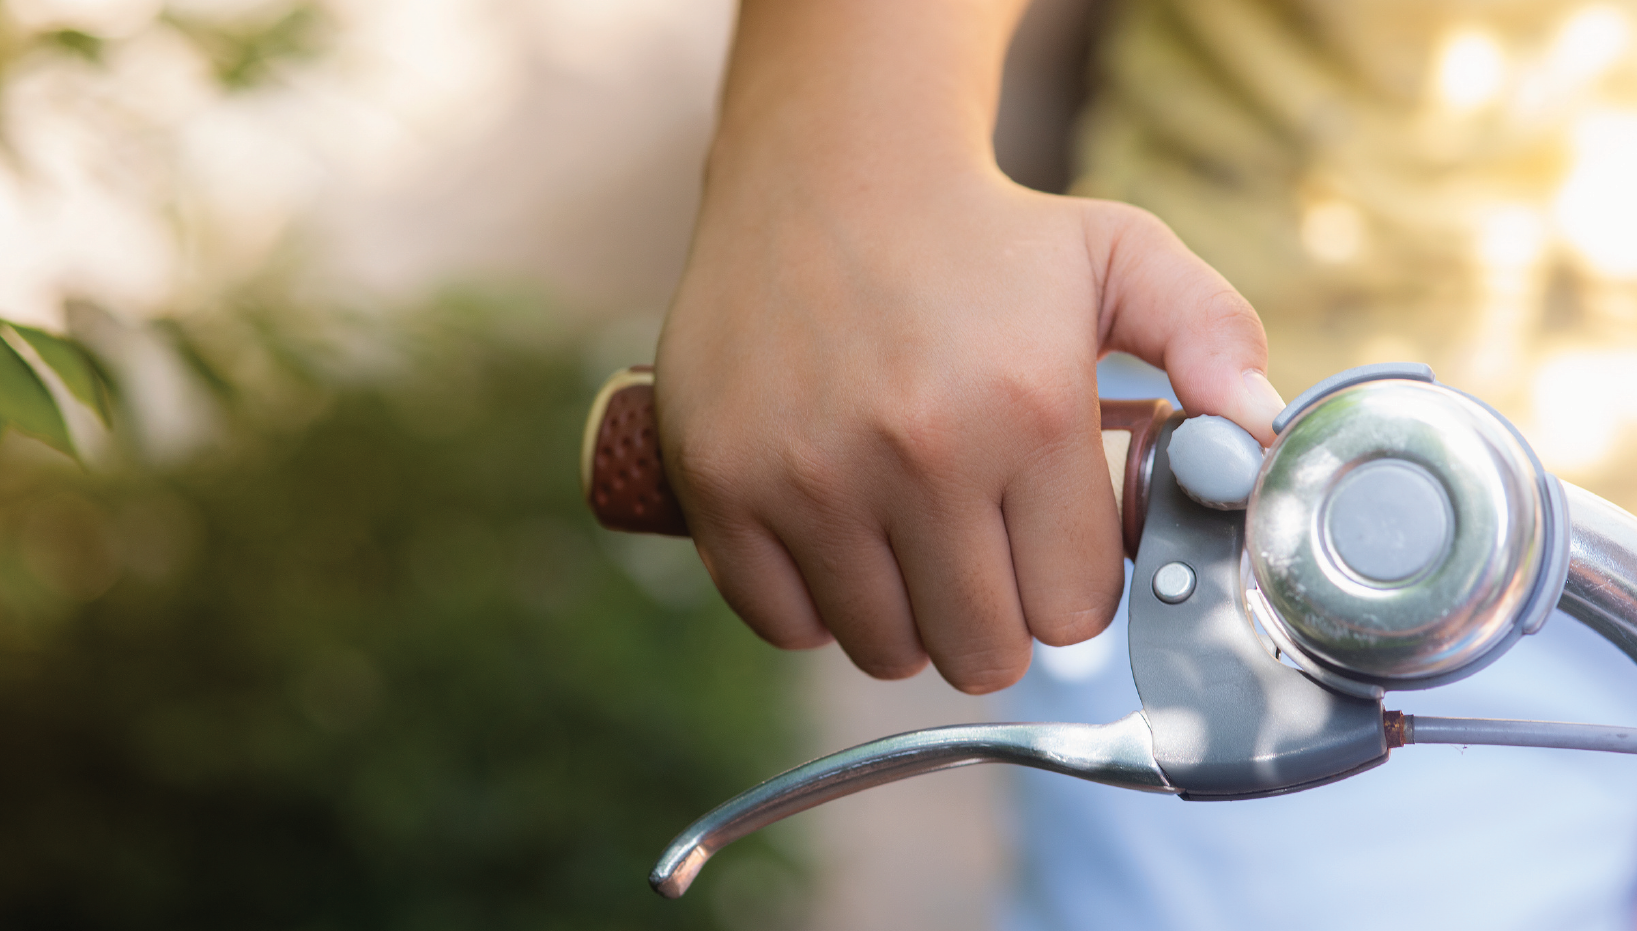 A person’s hand rings a silver bicycle bell. The bell is mounted on the bicycle handlebar. 